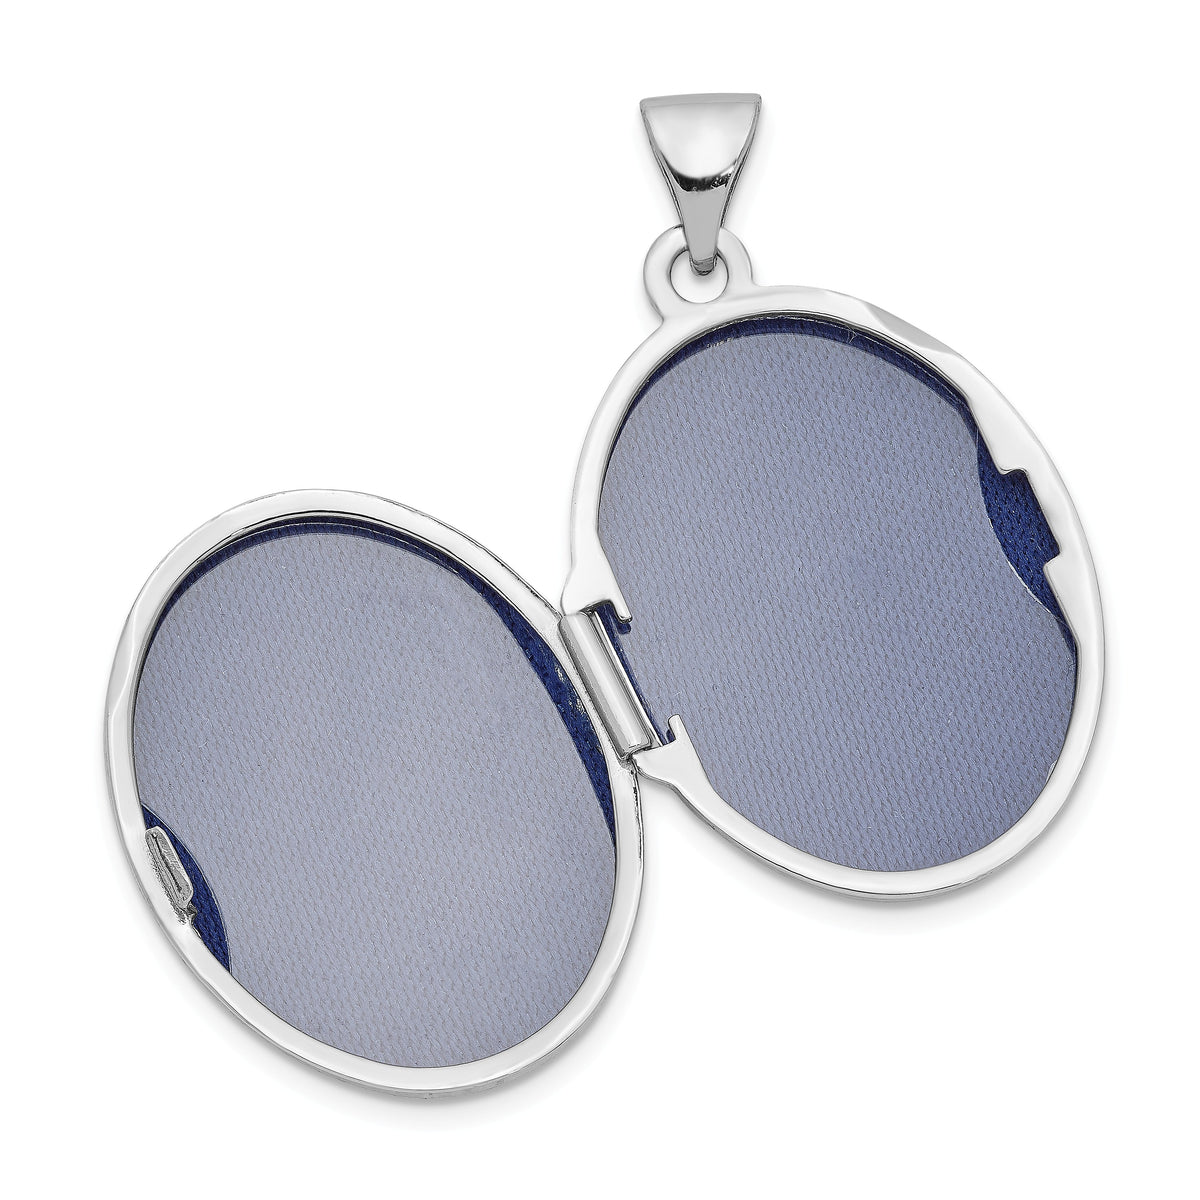 Alternate view of the 14k White Gold 21mm Polished Oval Locket by The Black Bow Jewelry Co.